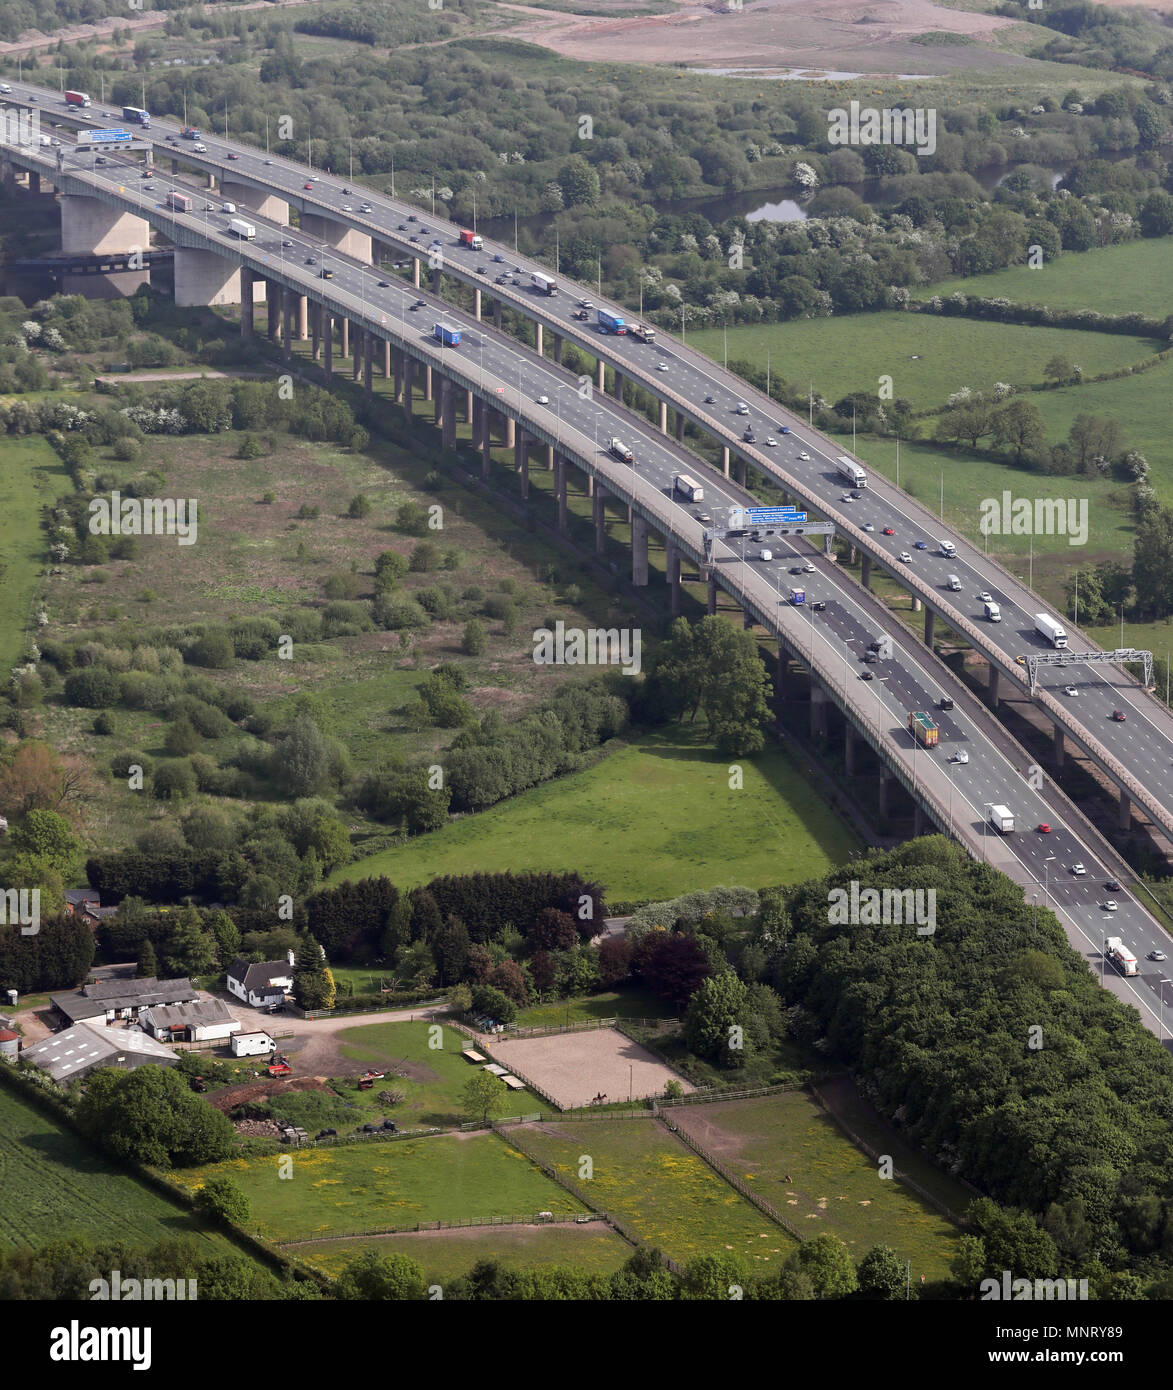 aerial view of the Thelwall Viaduct on the M6 in Cheshire, UK Stock Photo